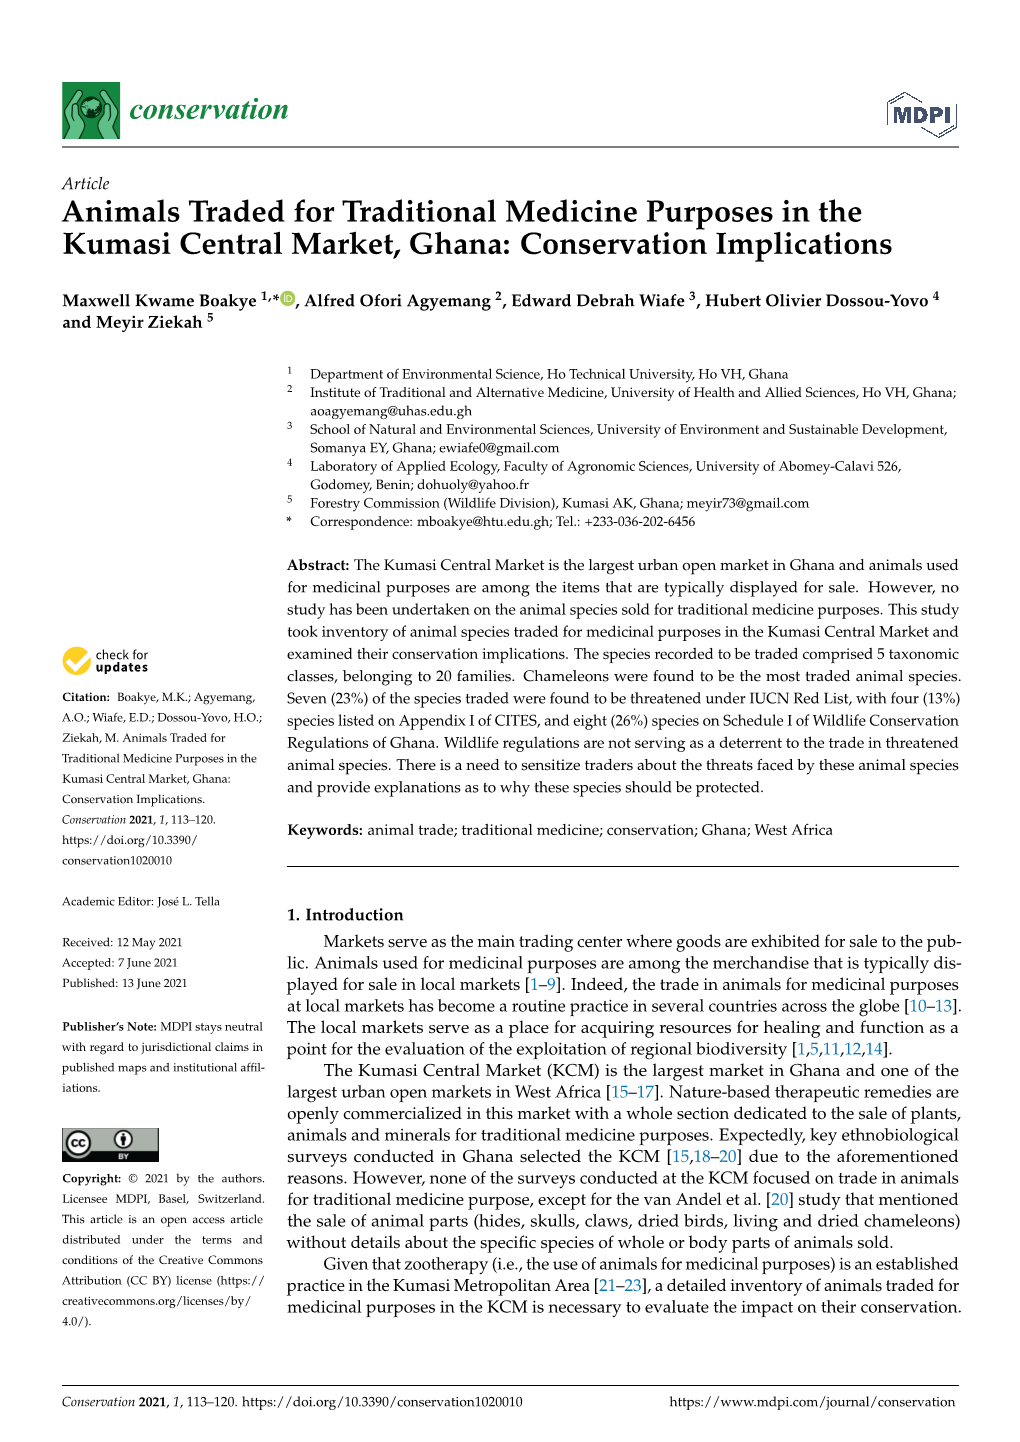 Animals Traded for Traditional Medicine Purposes in the Kumasi Central Market, Ghana: Conservation Implications